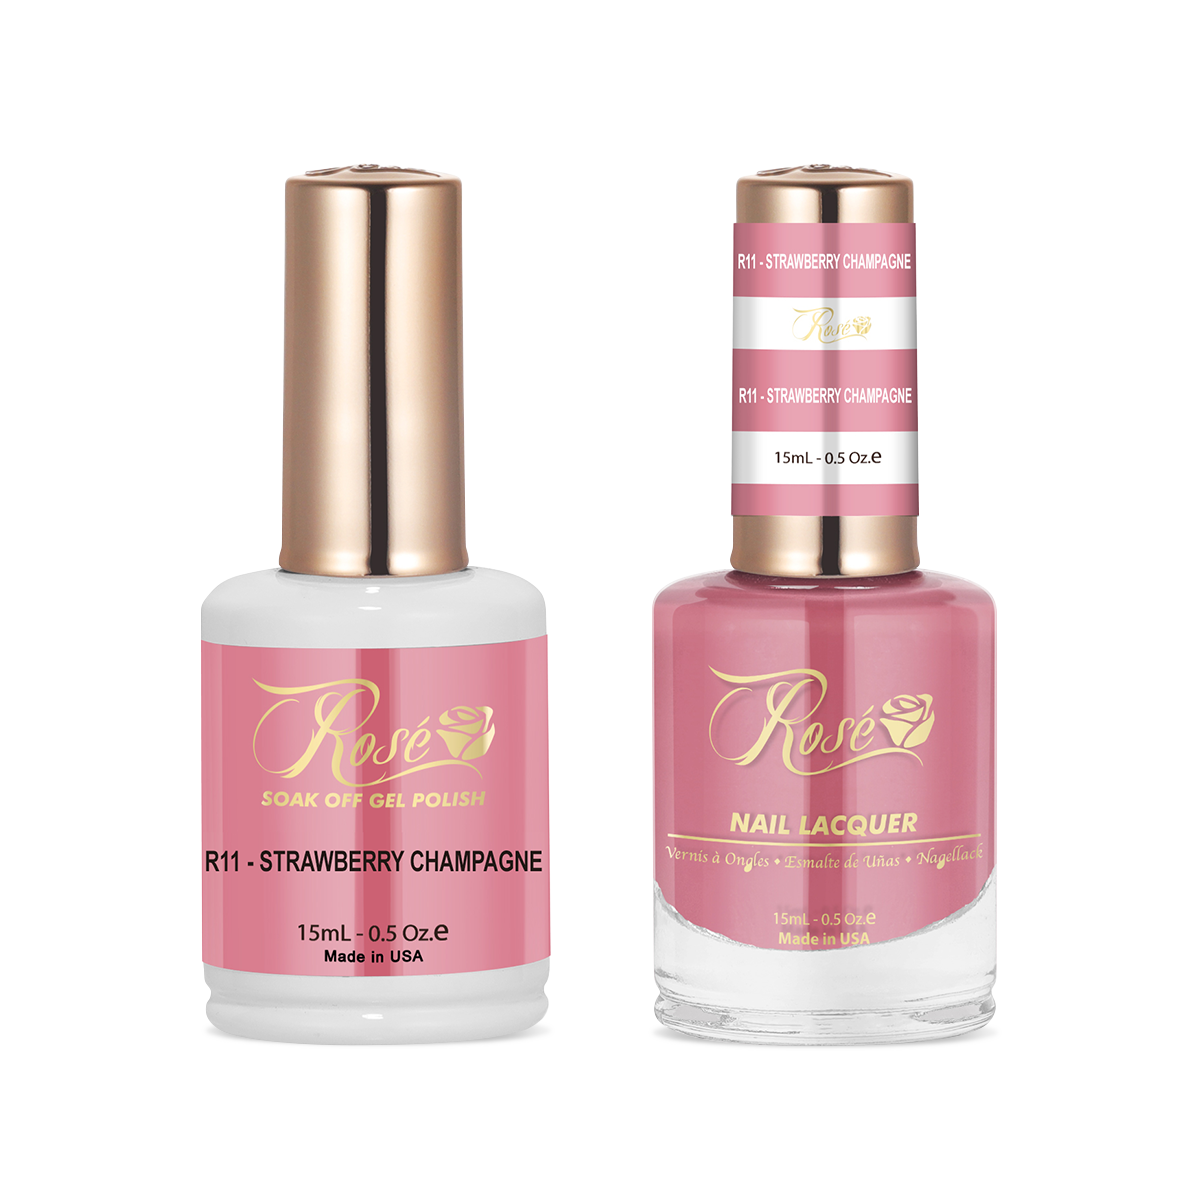 Rosé Duo - R011 Strawberry Champagne